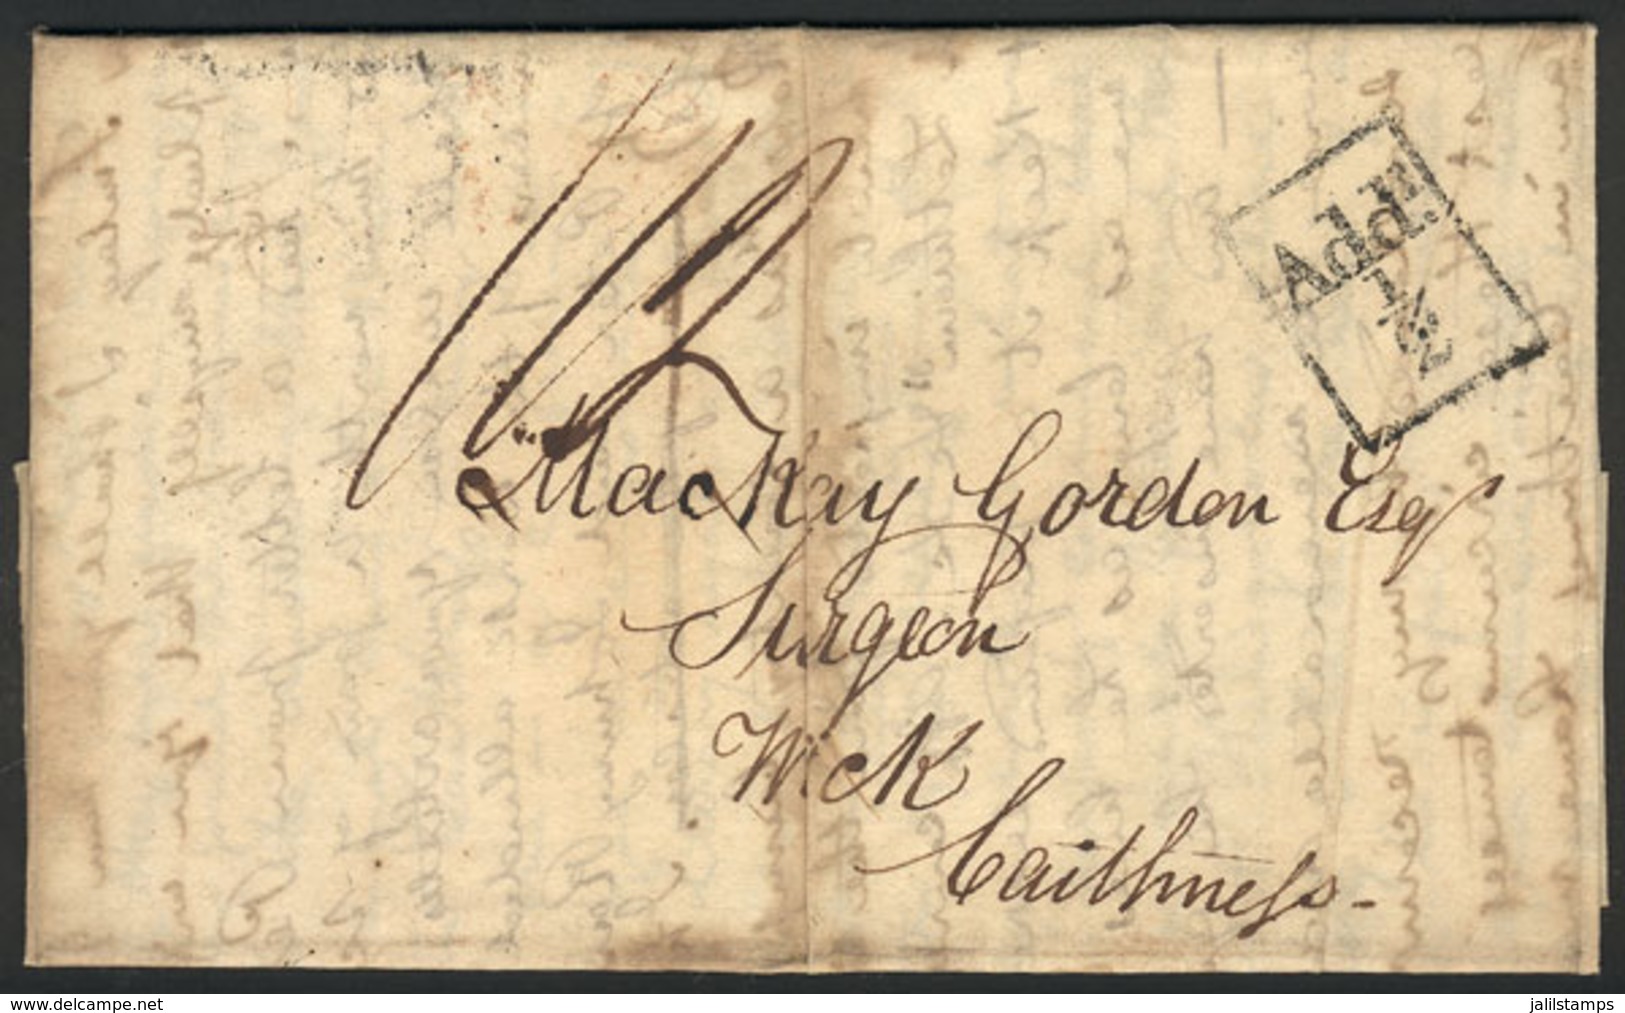 1319 GREAT BRITAIN: Entire Letter Dated 3/DE/1822, Sent From Glasgow To Caithness, With Interesting Postal Markings And  - ...-1840 Vorläufer